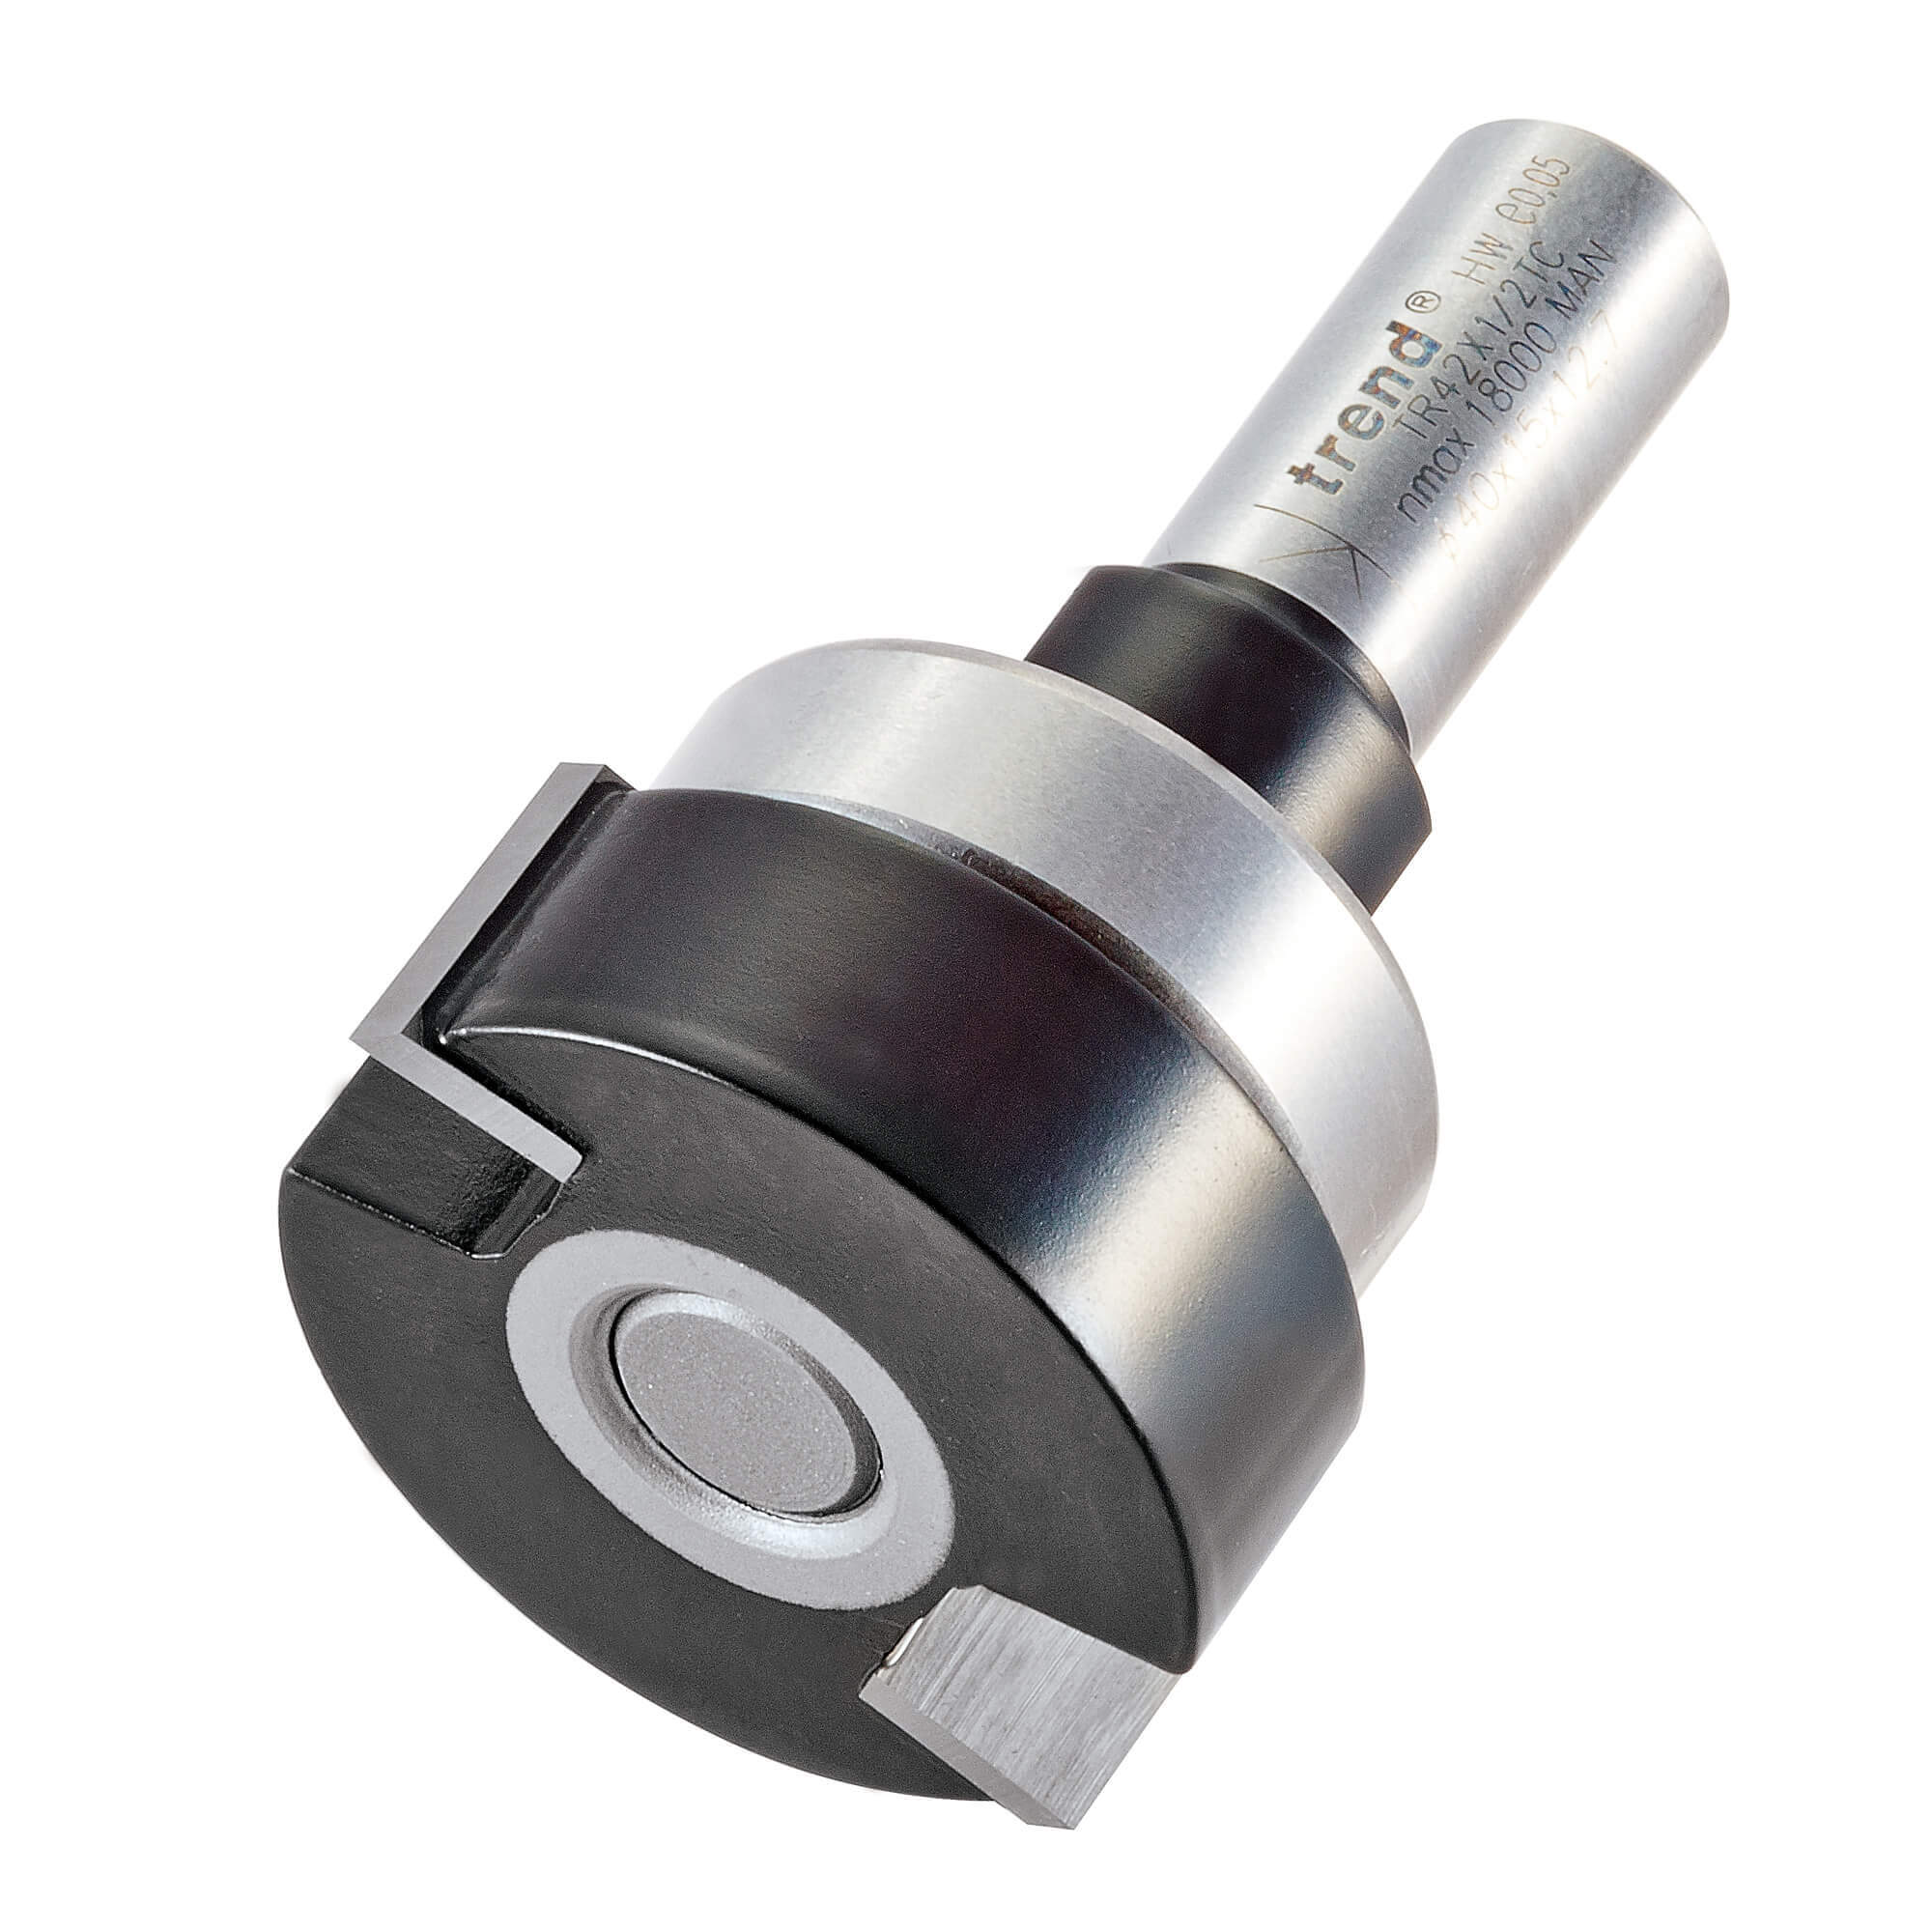 Image of Trend TRADE Bearing Guided Intumescent Router Cutter 15mm 40mm 1/2"